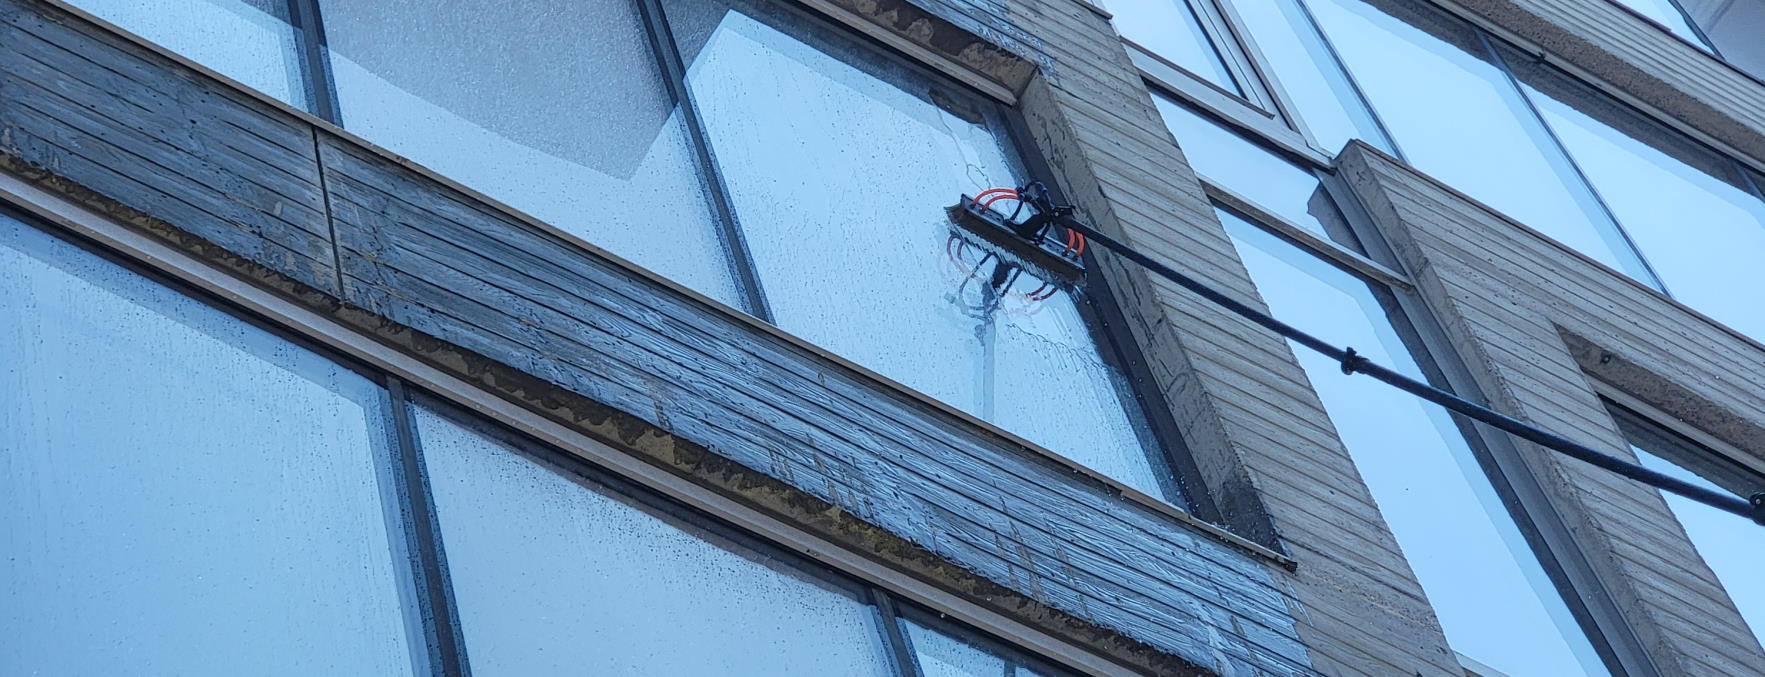 Window cleaning in apartnmets